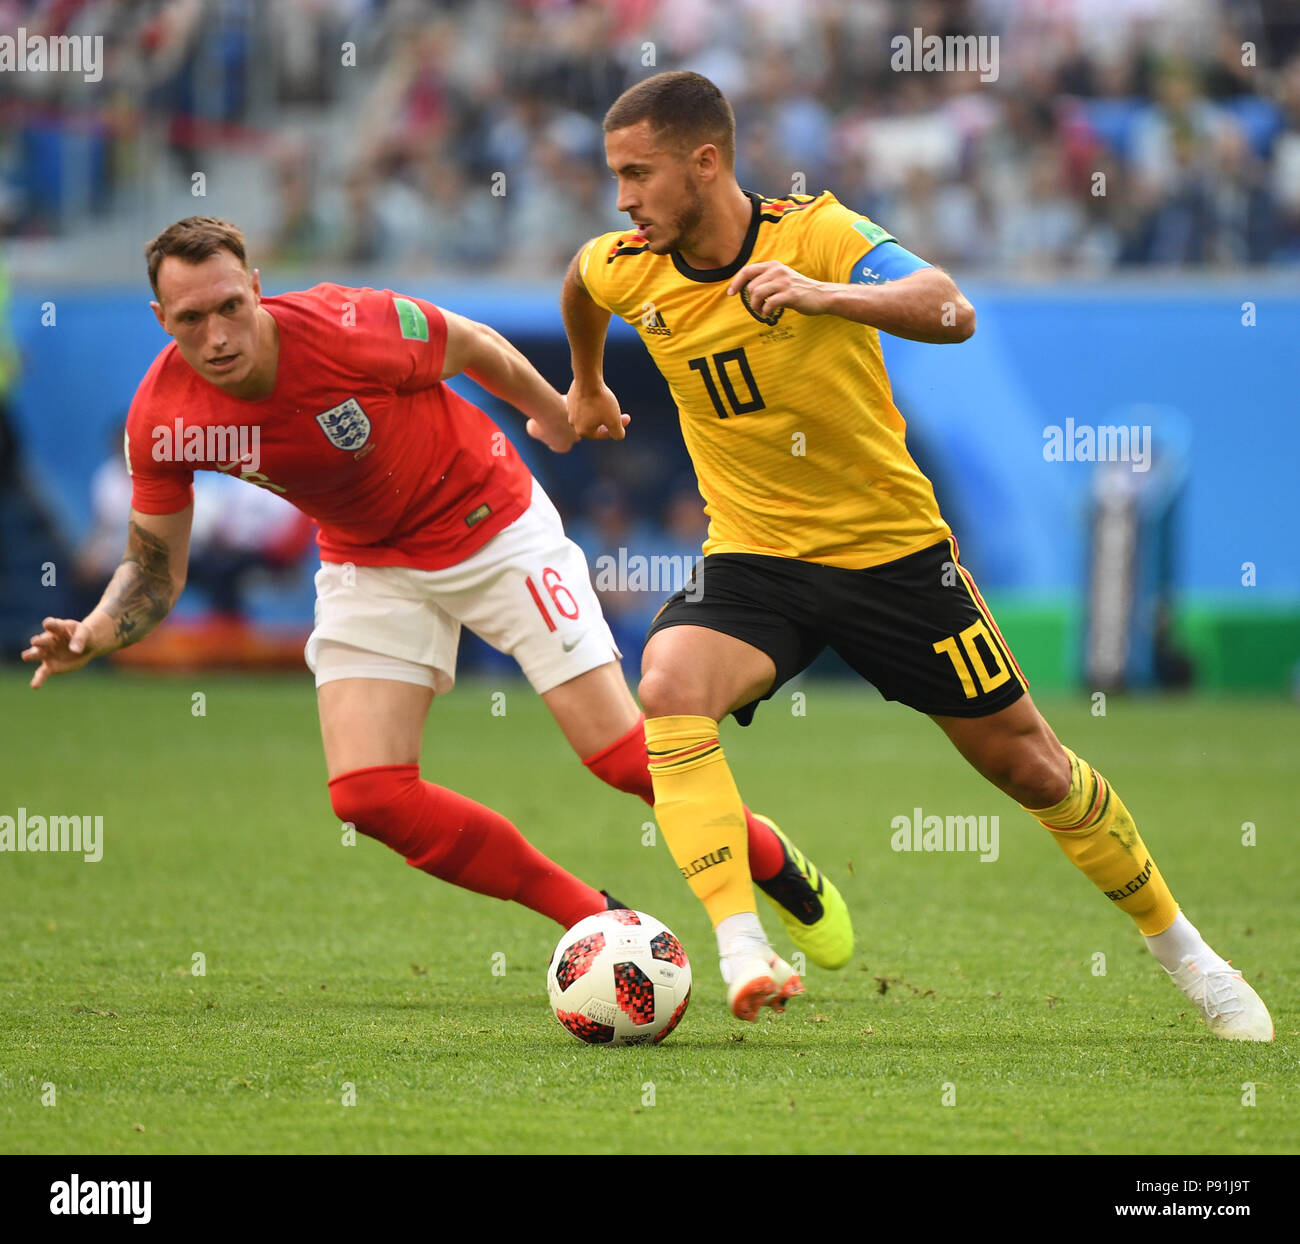 Saint Petersburg, Russia. 14th July, 2018. Phil Jones (L) of England vies with Eden Hazard of Belgium during the 2018 FIFA World Cup third place play-off match between England and Belgium in Saint Petersburg, Russia, July 14, 2018. Credit: Li Ga/Xinhua/Alamy Live News Credit: Xinhua/Alamy Live News Stock Photo